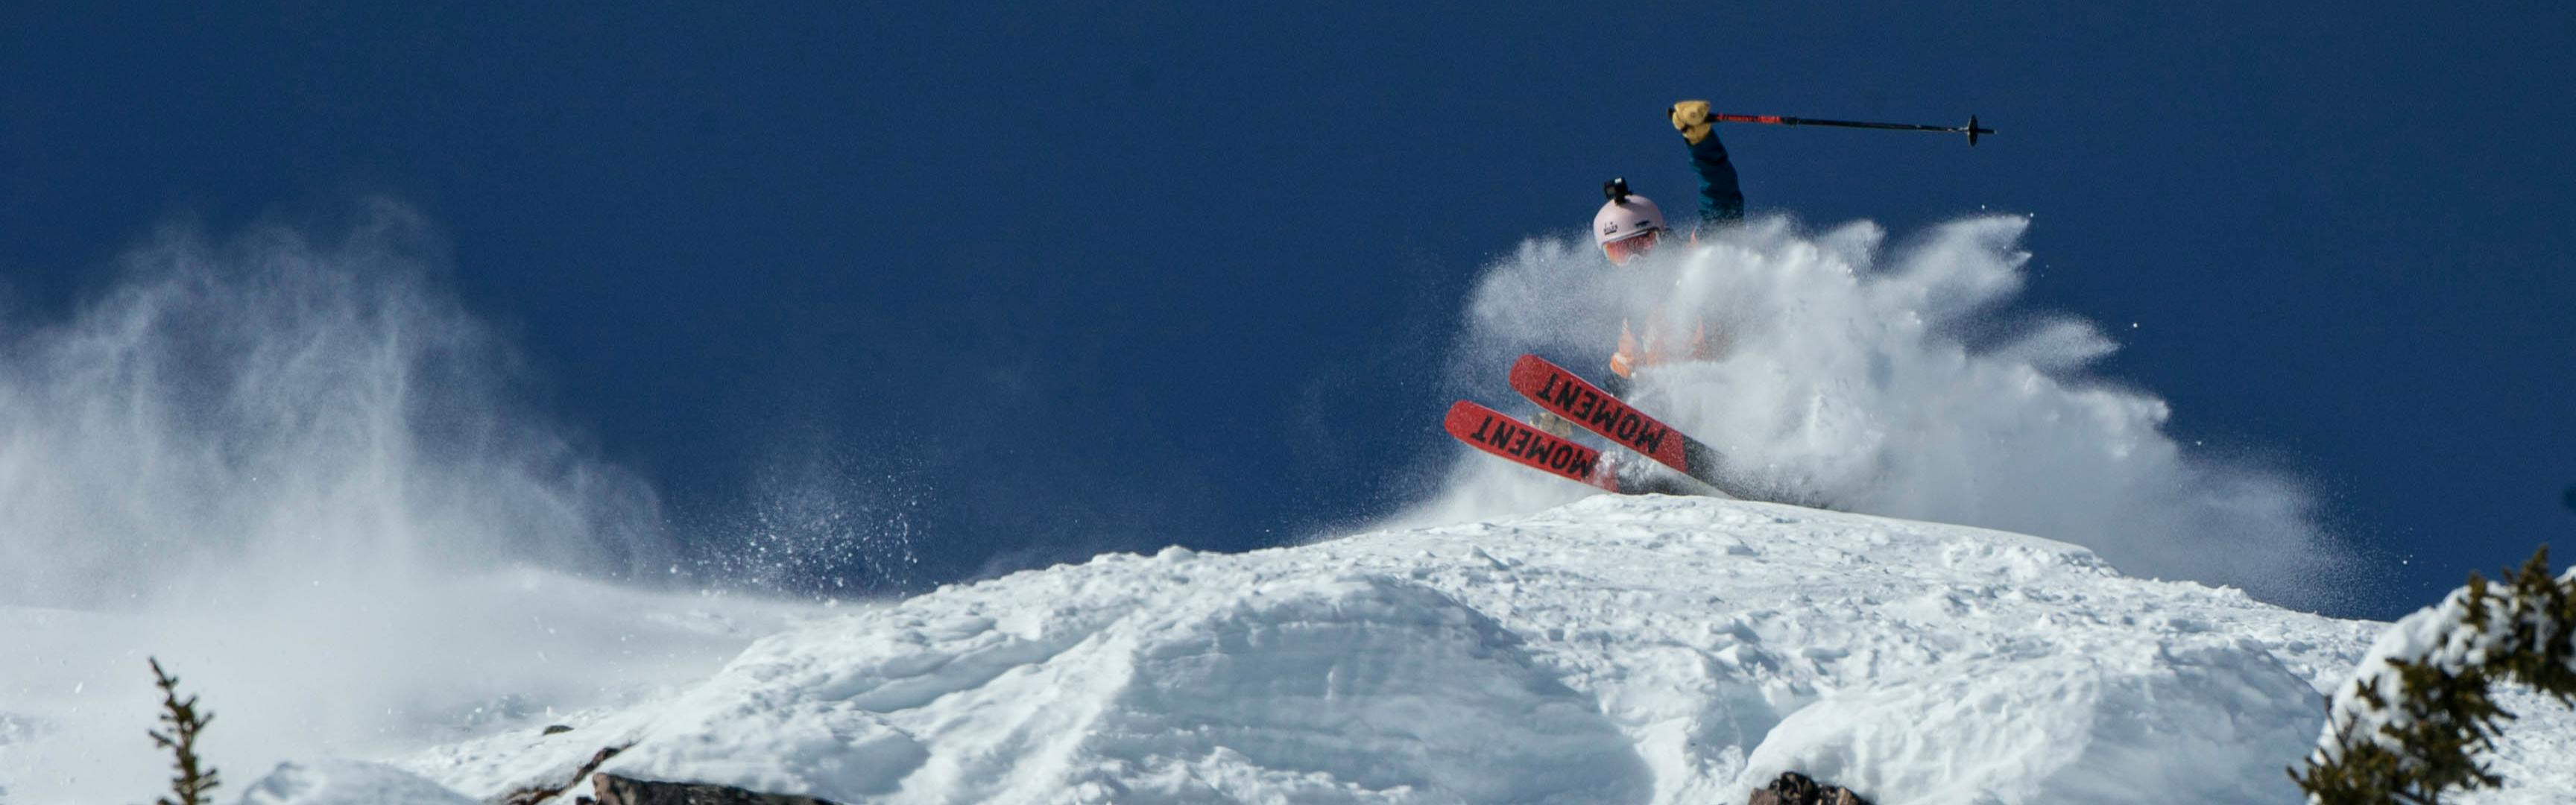 A skier carves a turn on a lip, sending up a cloud of powder with their Moment skis. 